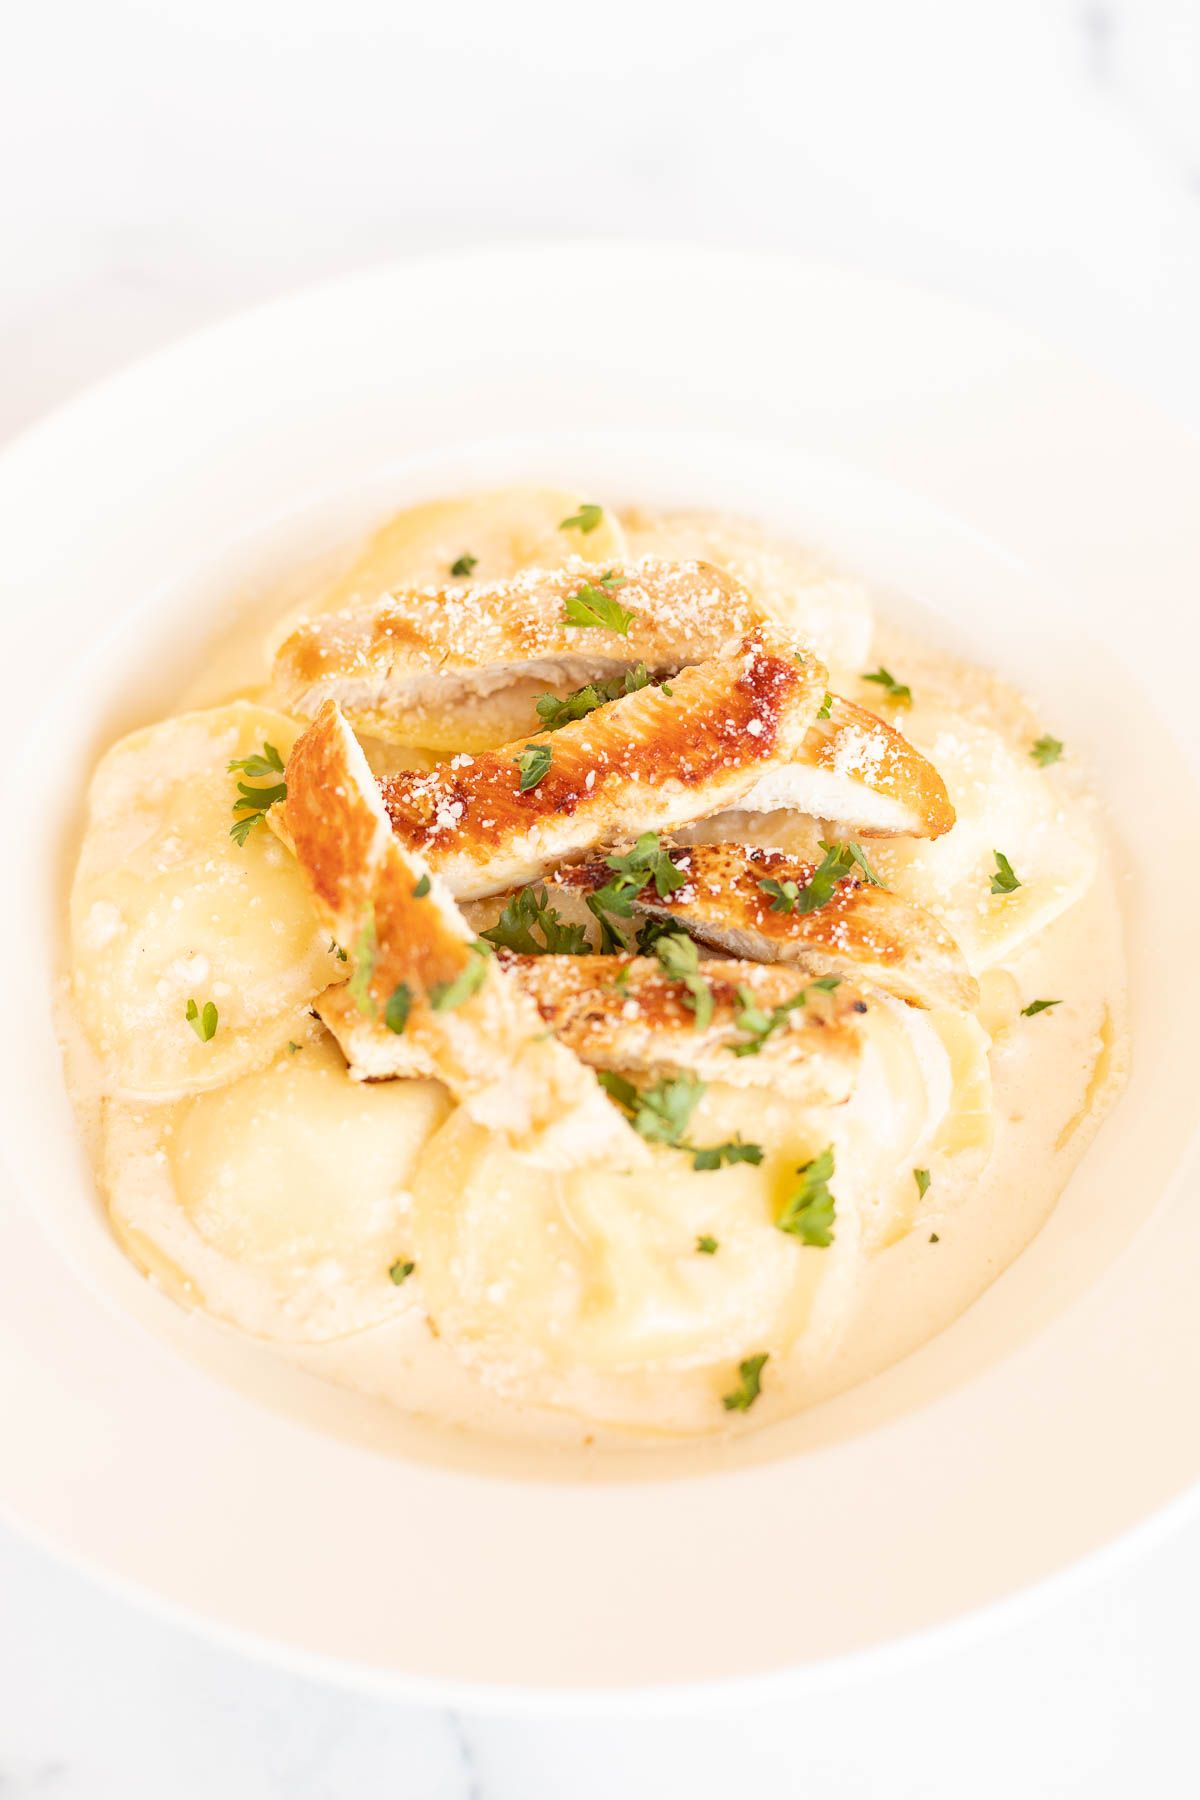 Tortelloni alfredo with grilled chicken on a white plate.